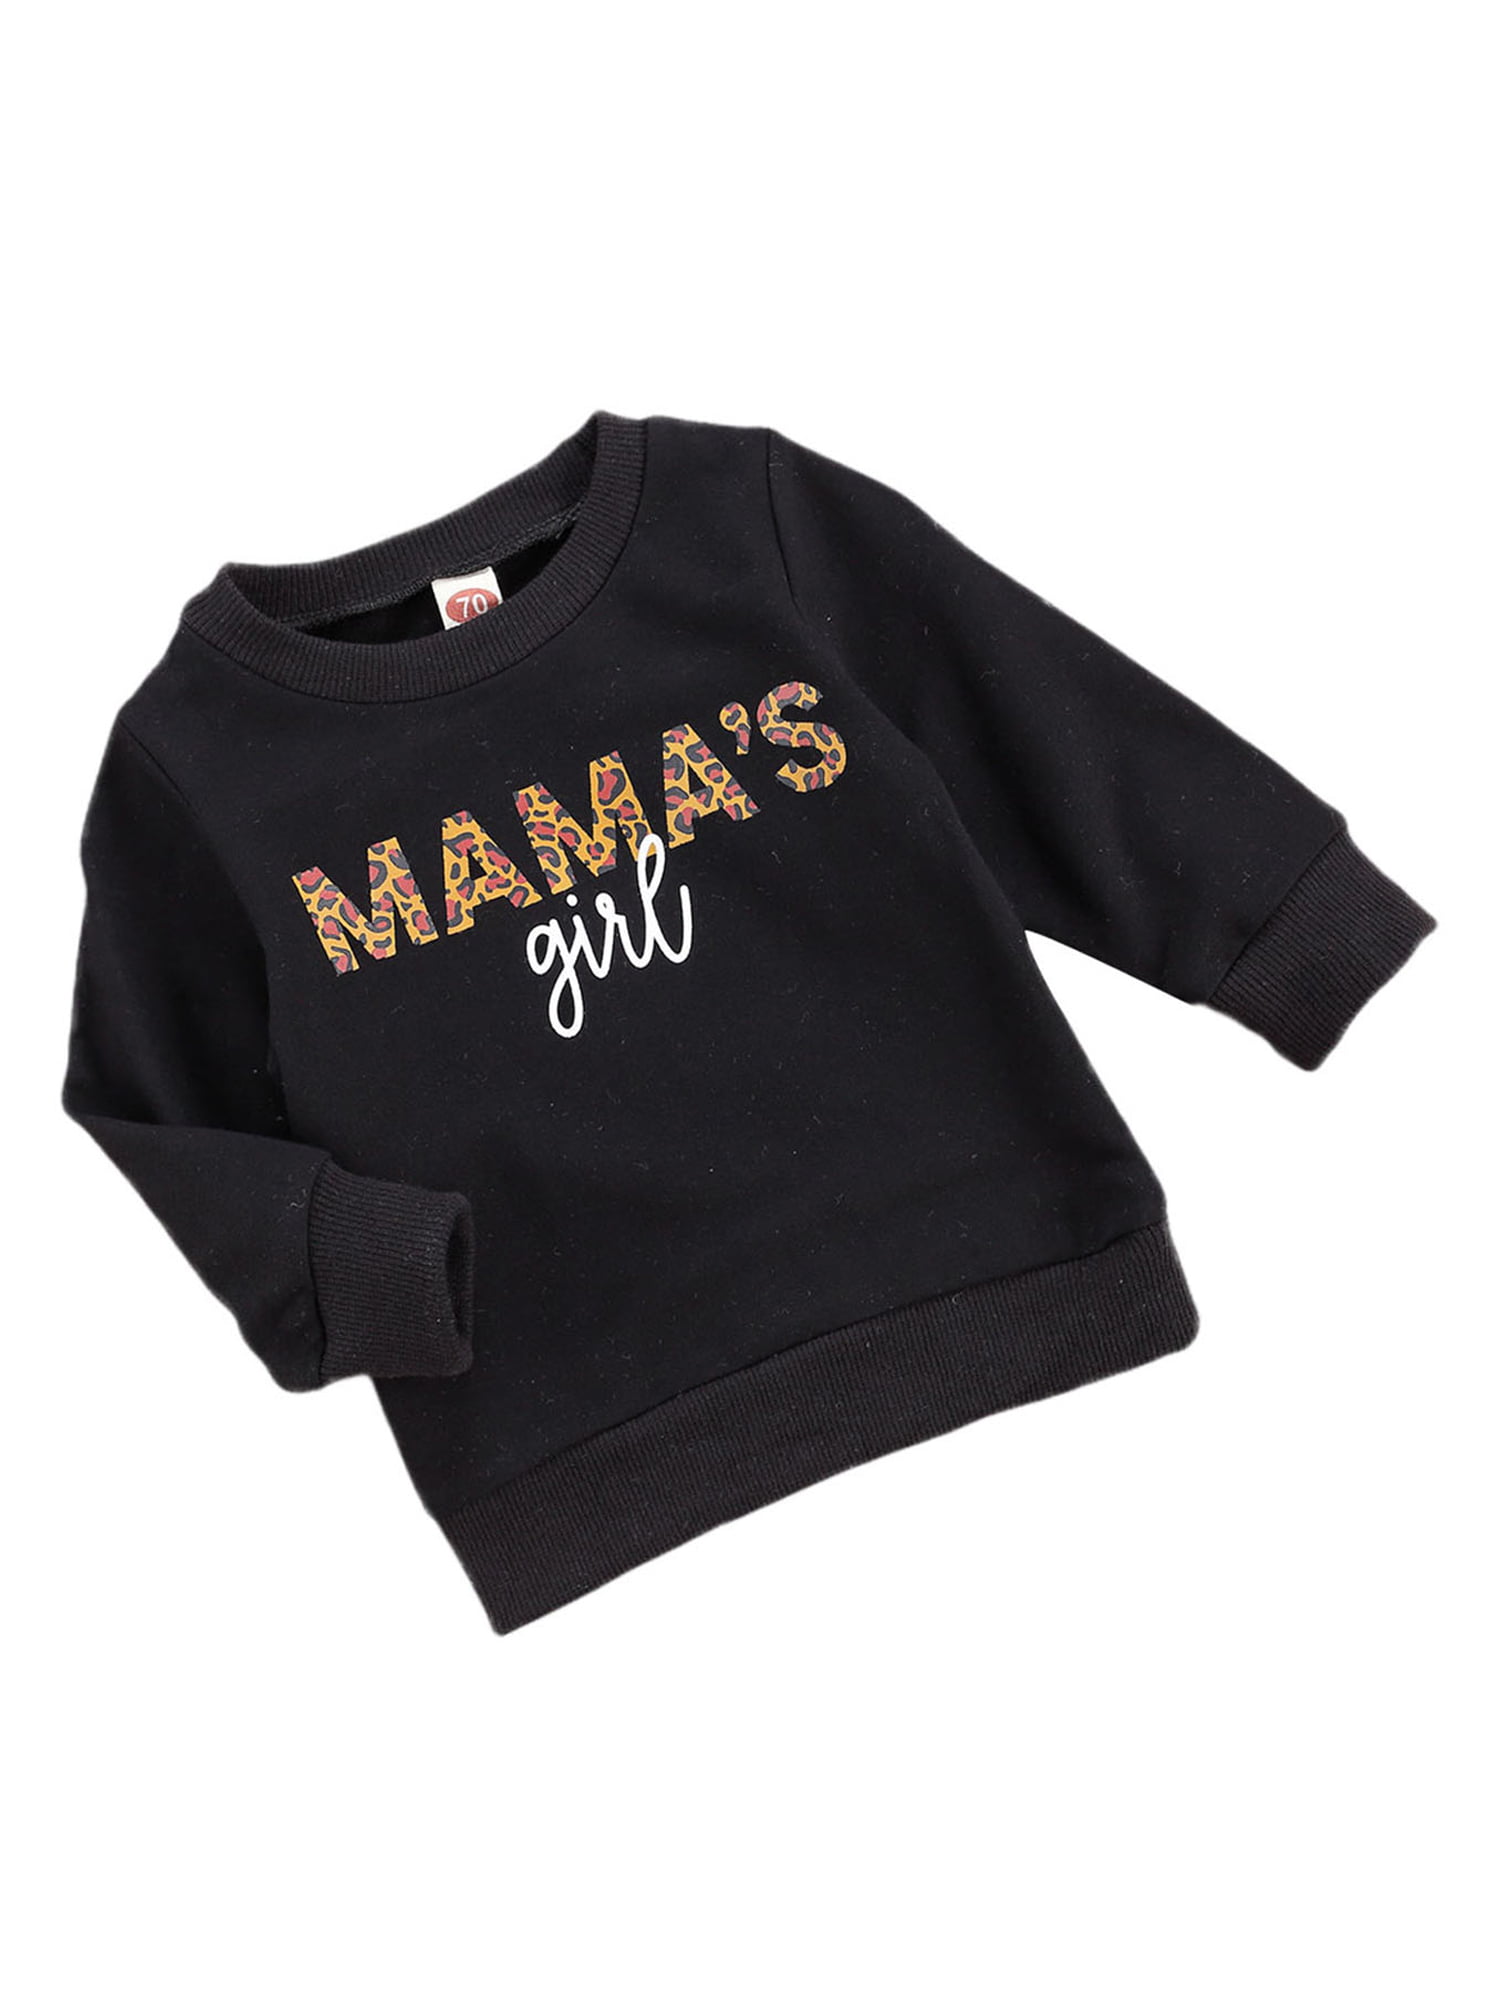 Baby Girls Sweatshirts Mama's Girl Letter Leopard Print Long Sleeve Pullover Cotton Tops Outfits 